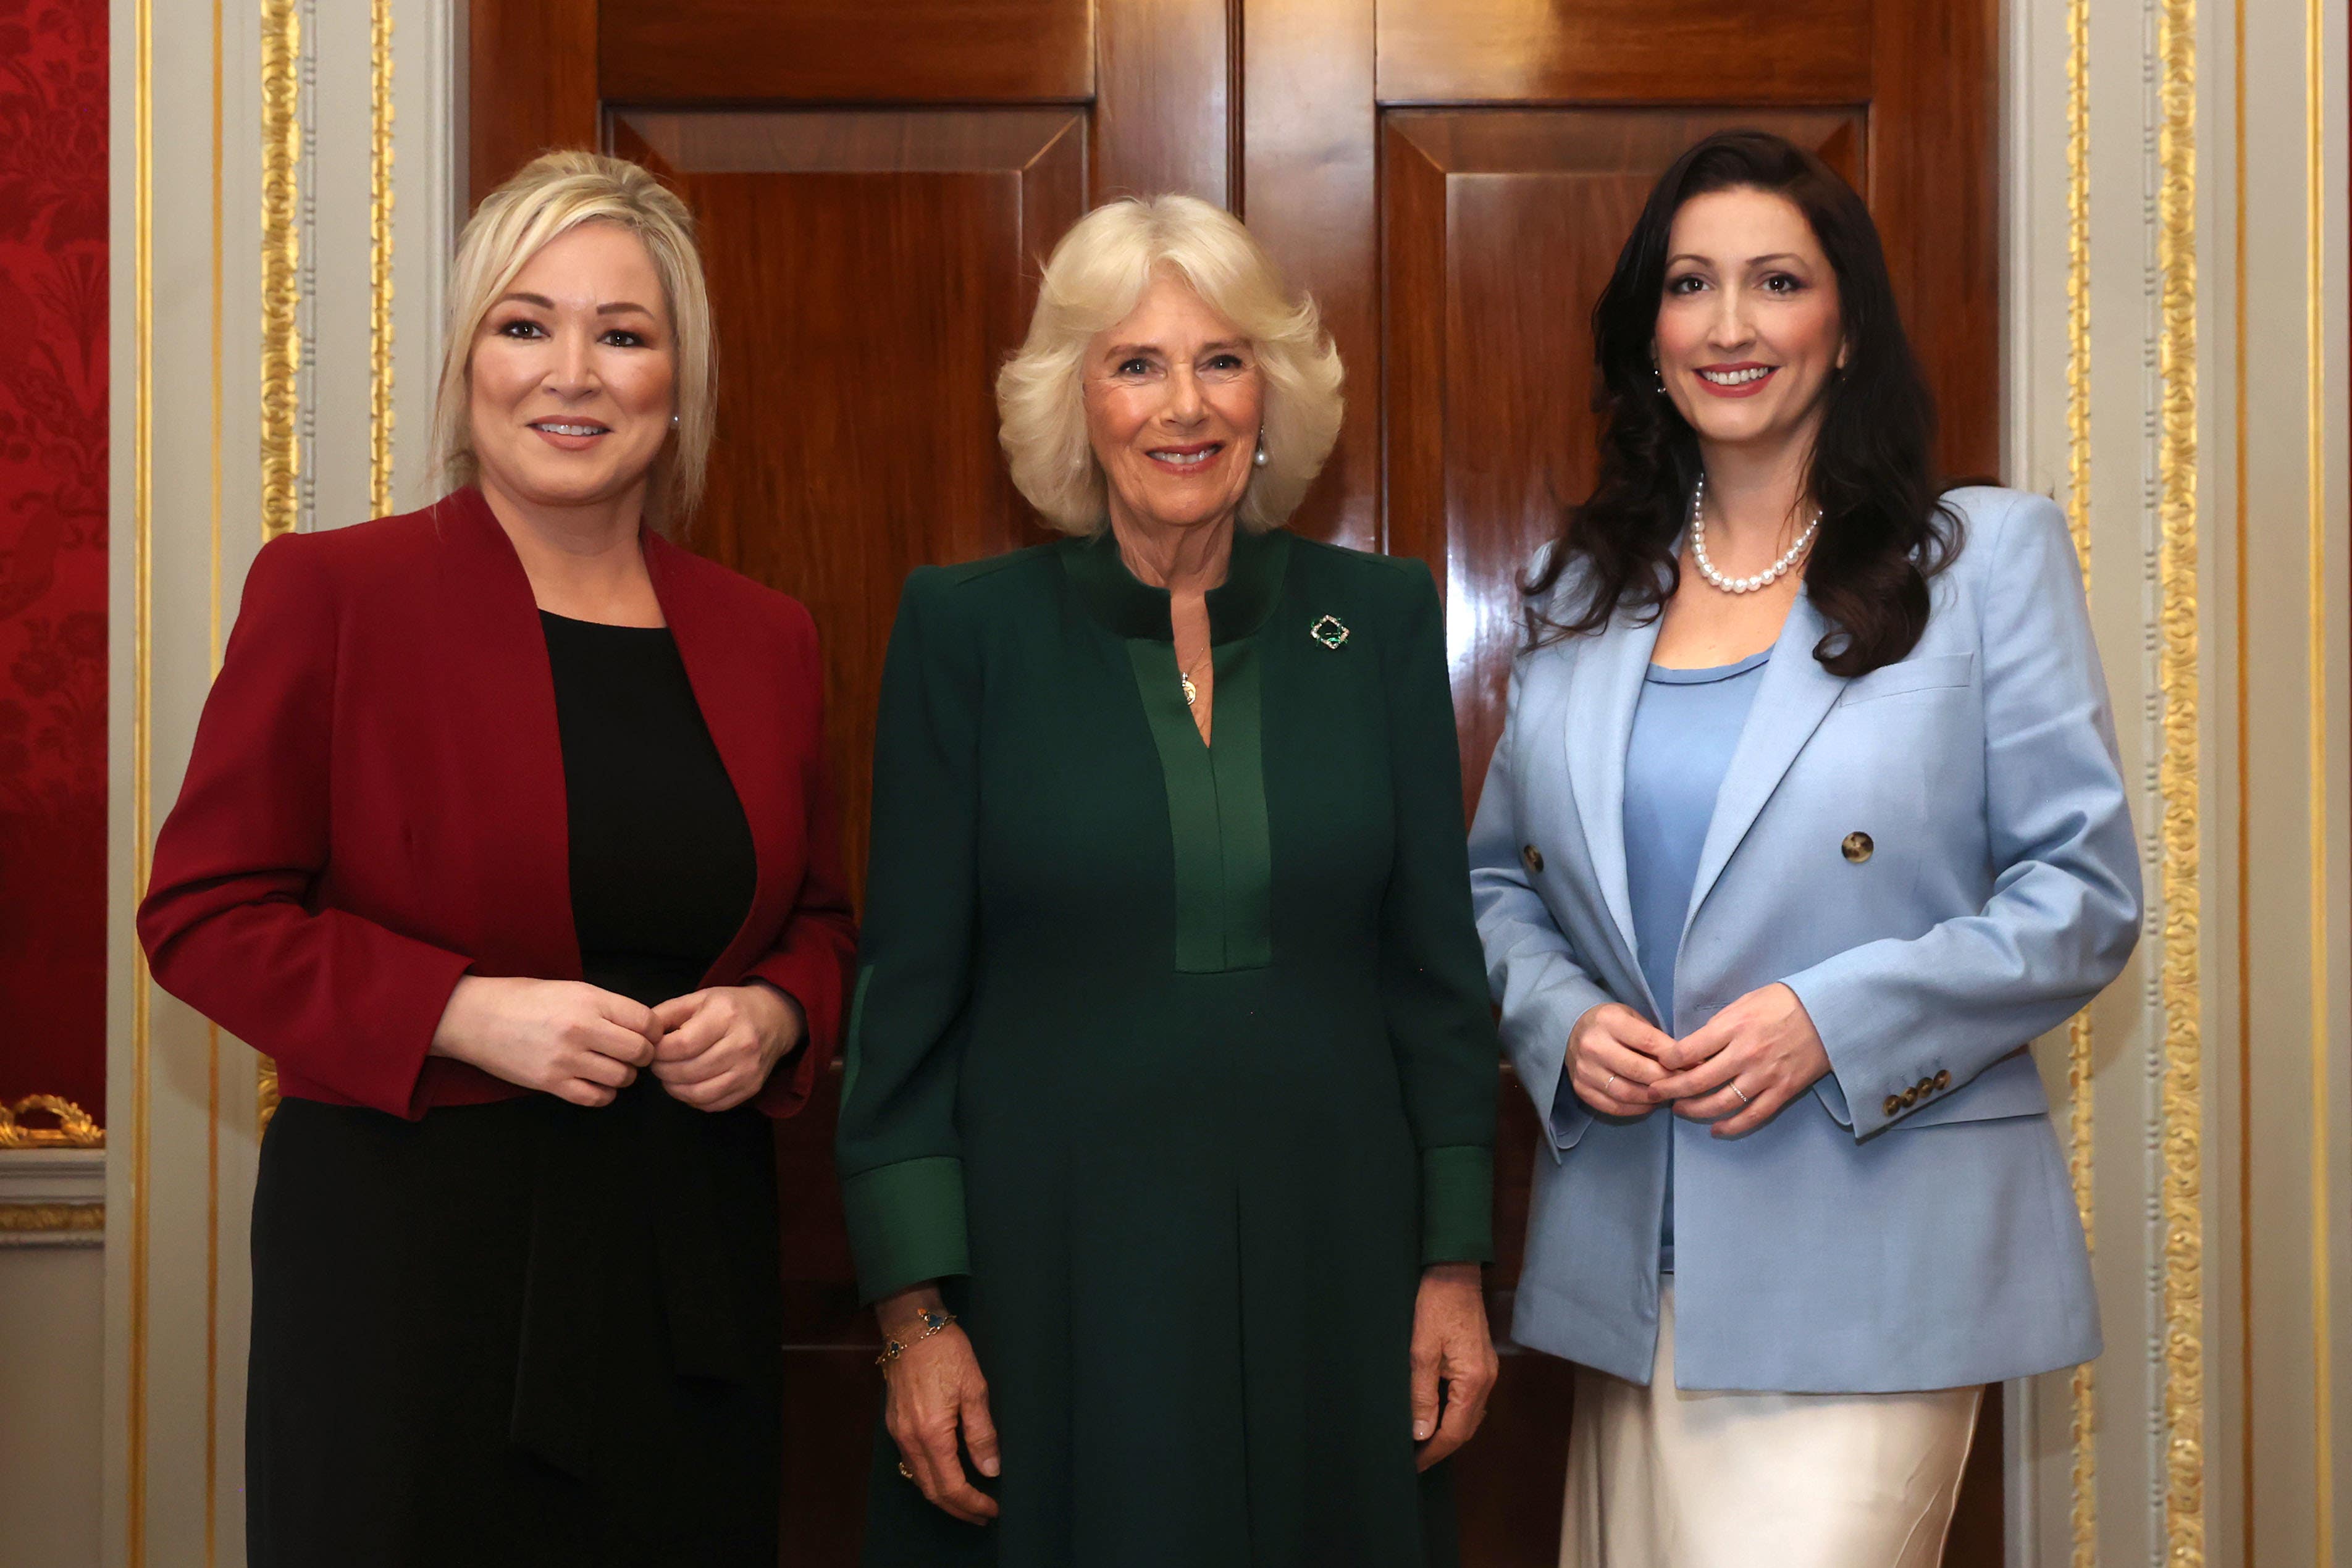 The Queen with first minister Michelle O’Neill, left, and deputy first minister Emma Little-Pengelly